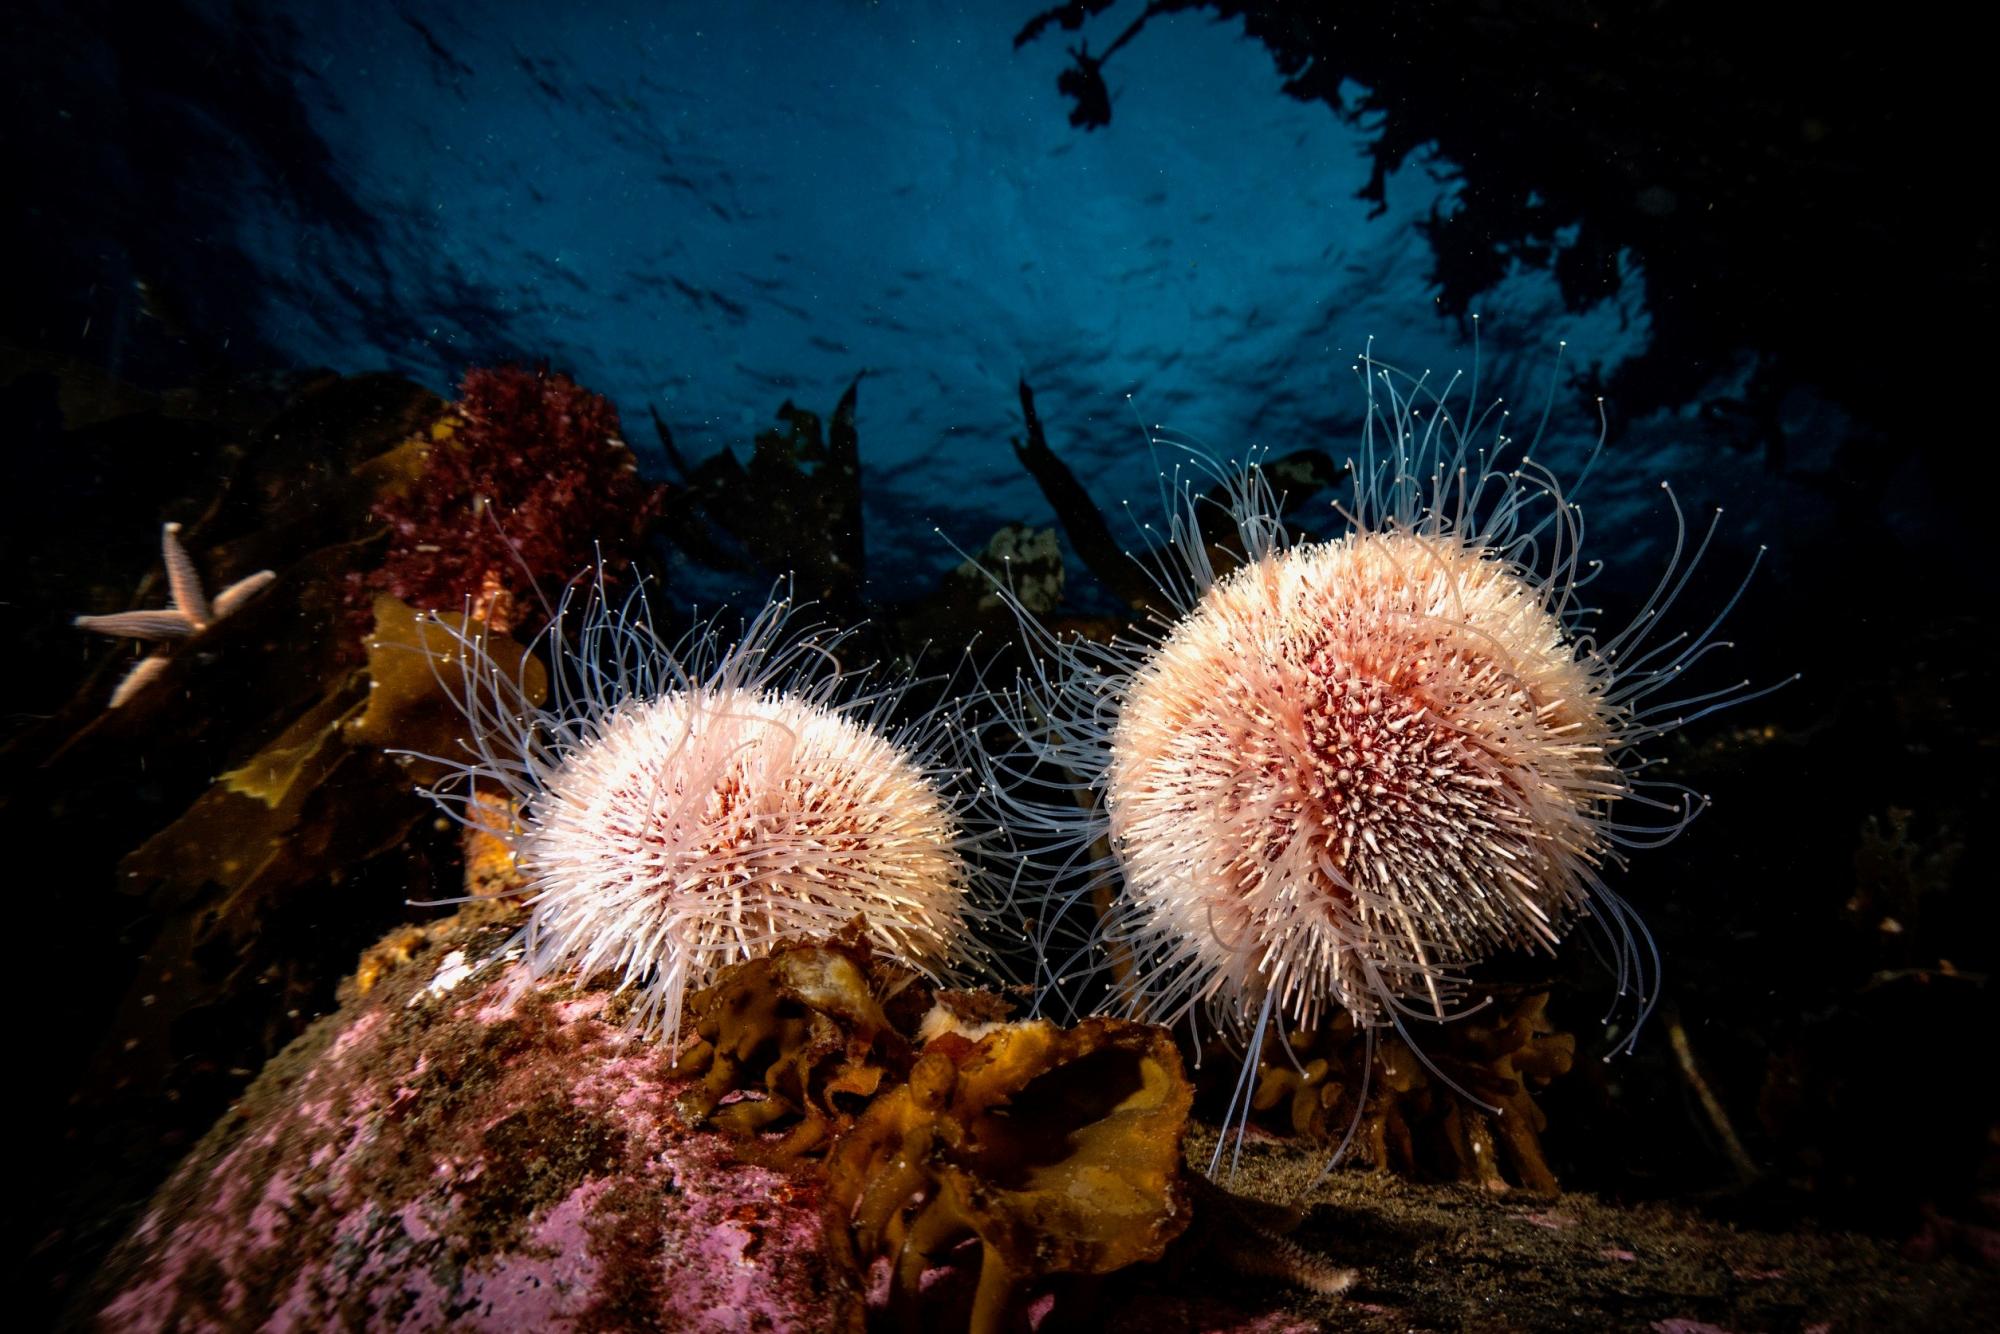 A pair of urchins sitting on a rocky reef, Lerwick, Shetland.